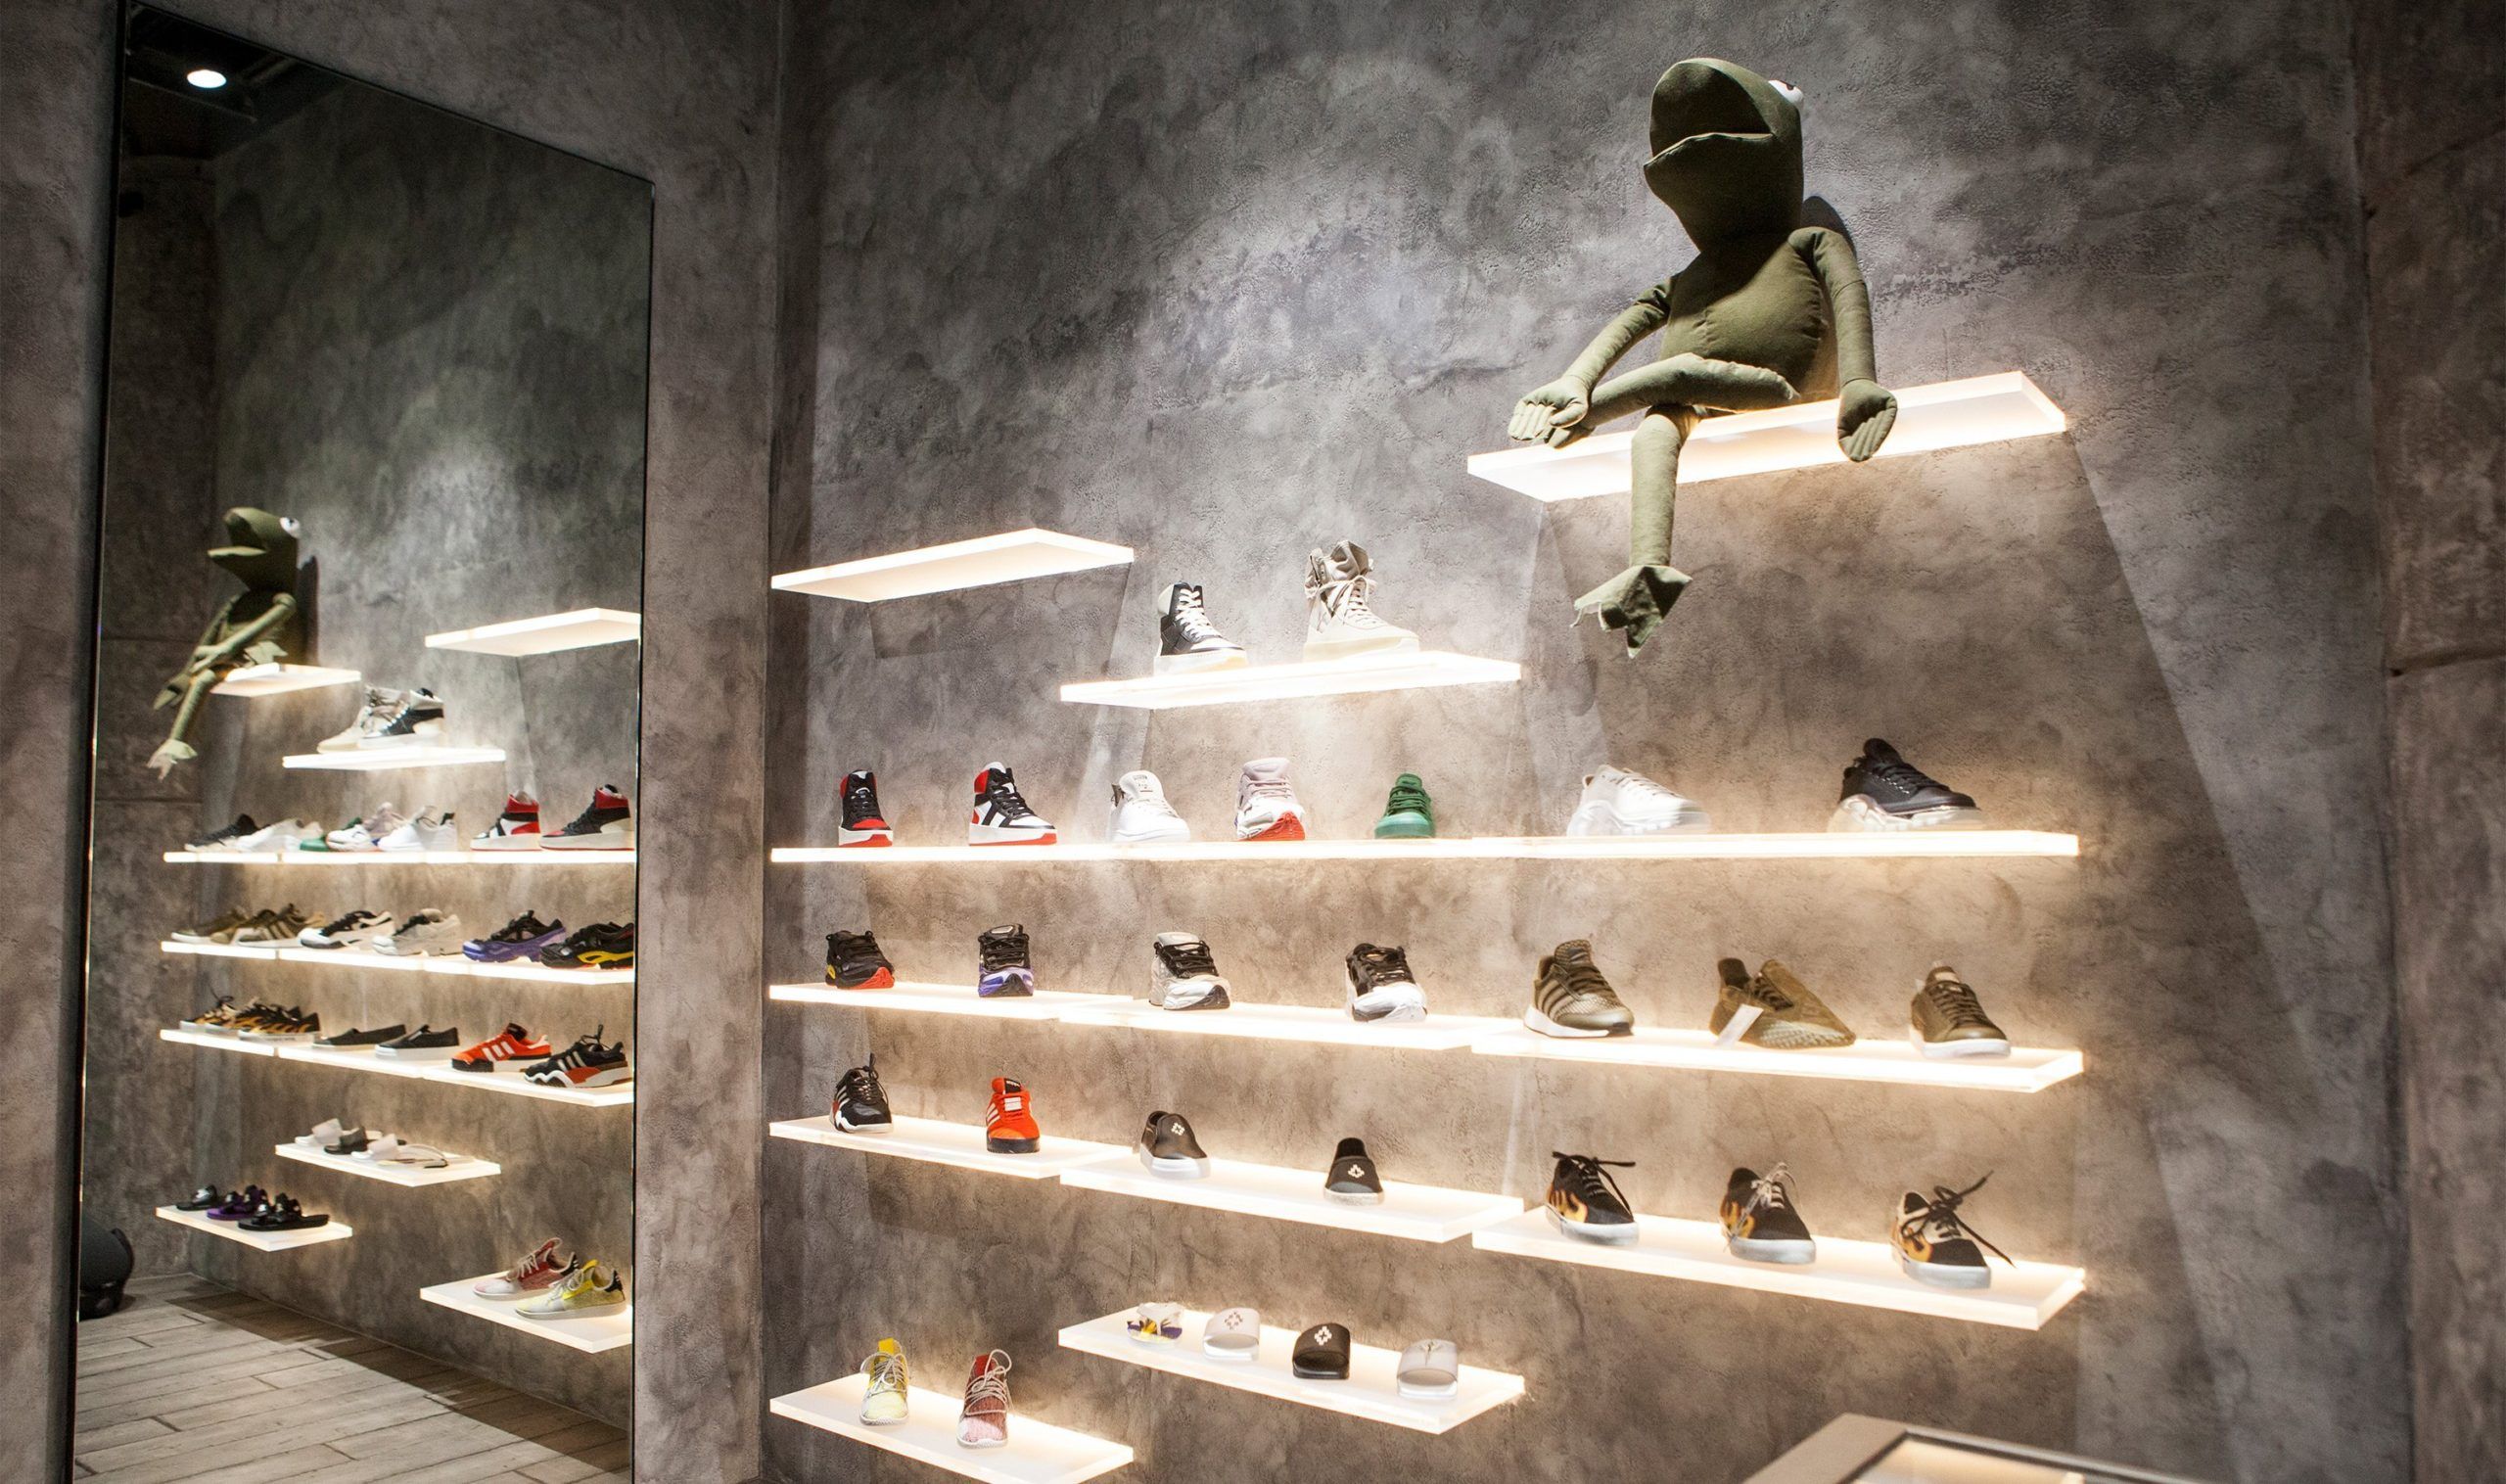 Amsterdam Sneaker Shops - Ranked by a Sneakerhead - Solemate Adventures